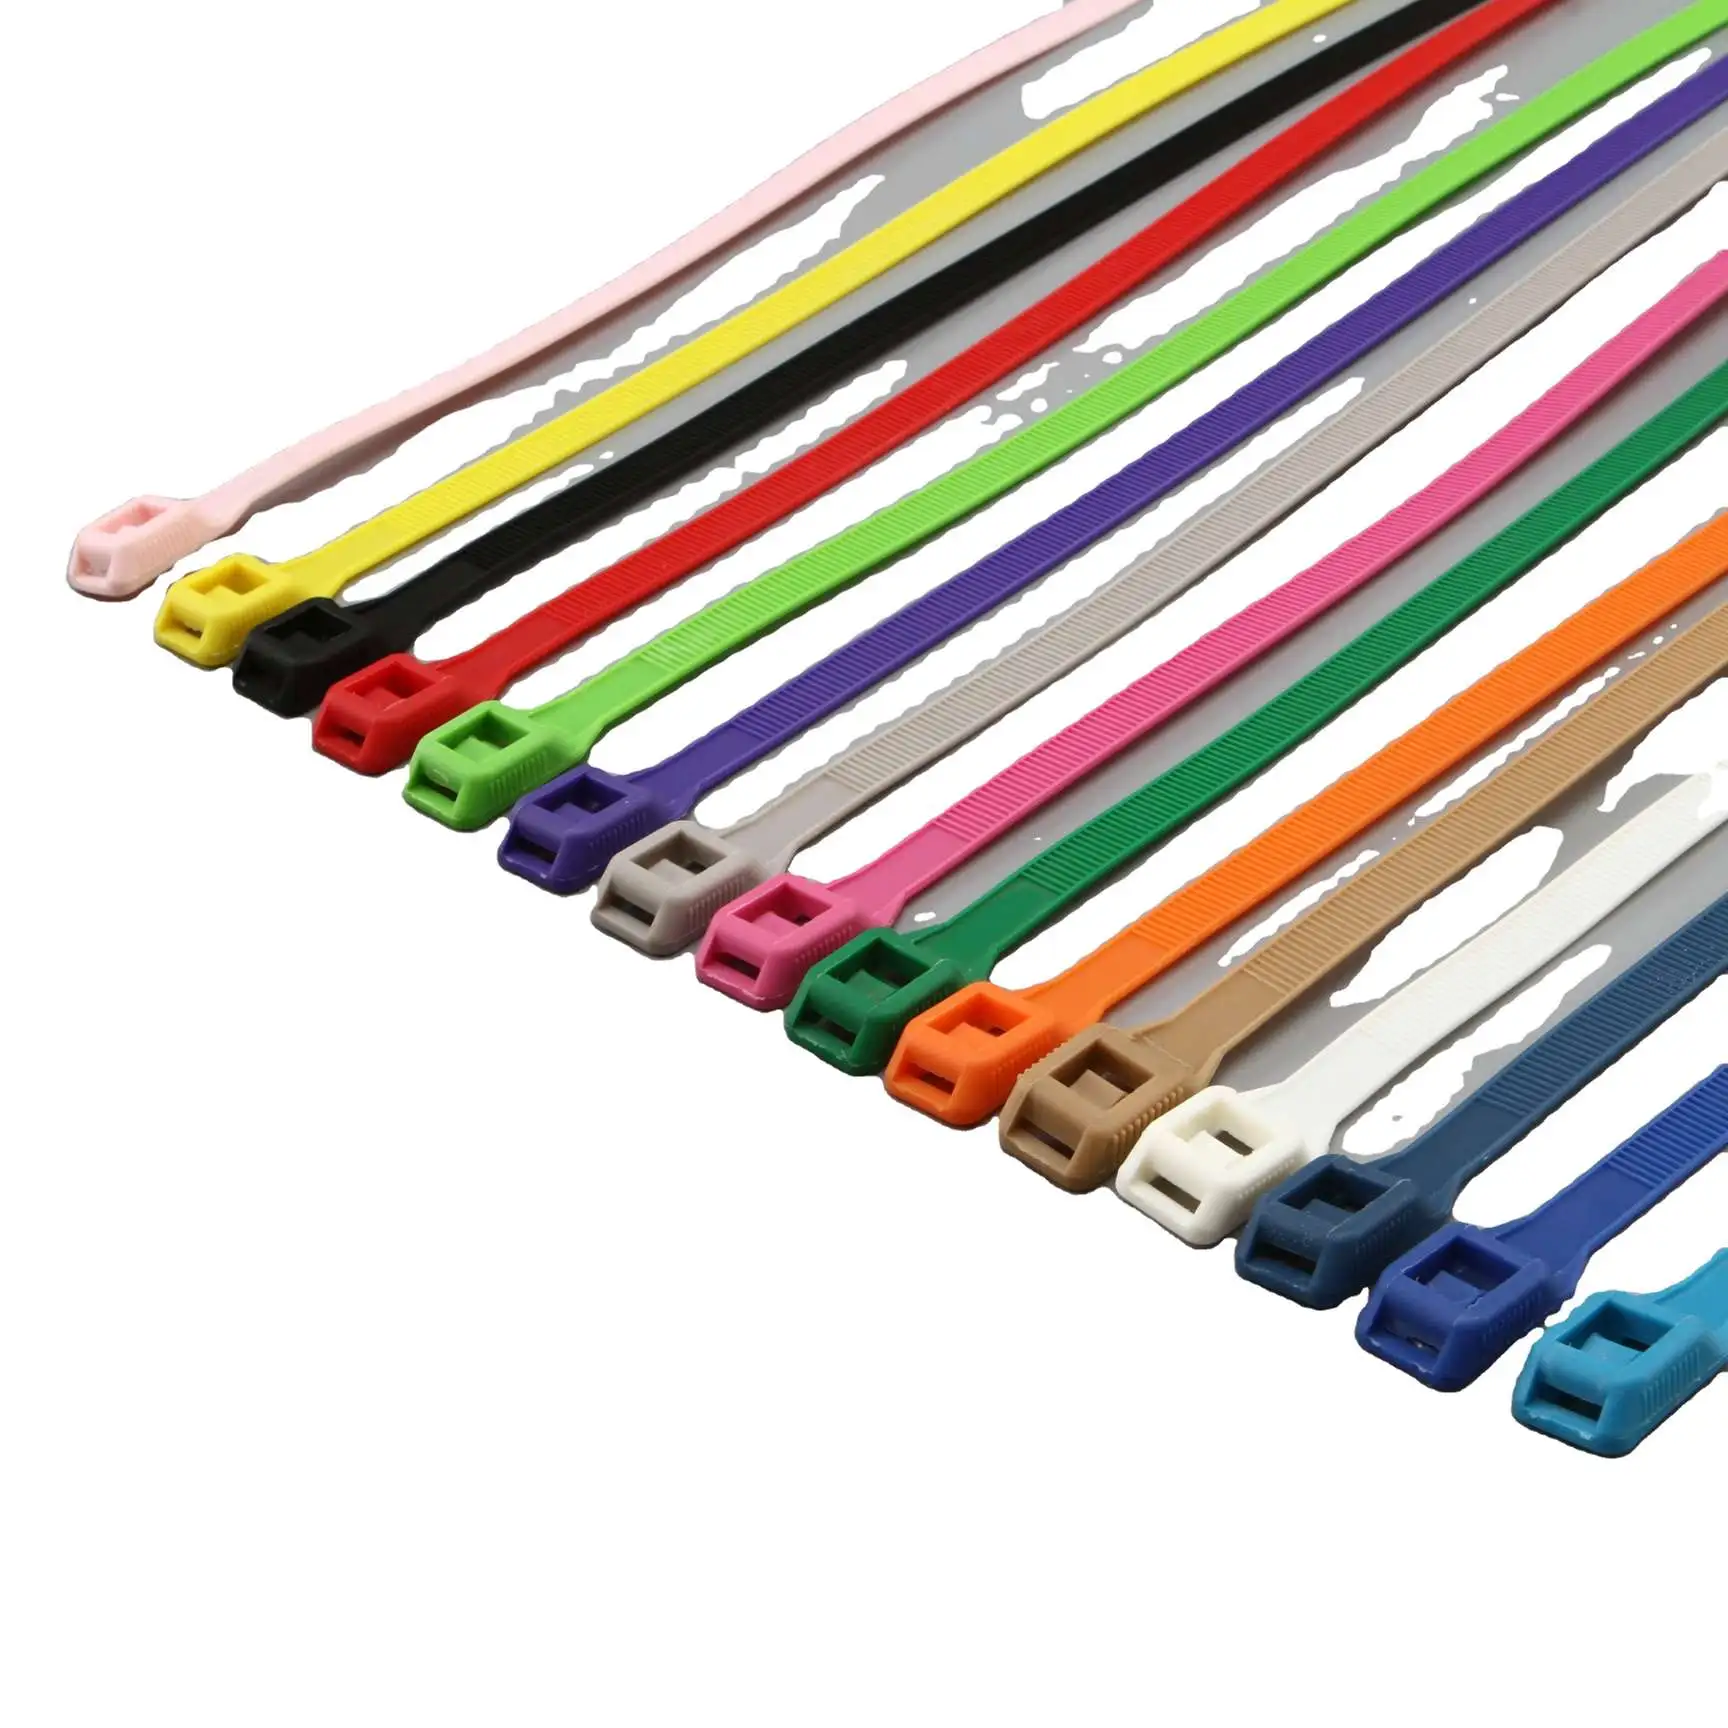 Anti disassembly nylon cable ties